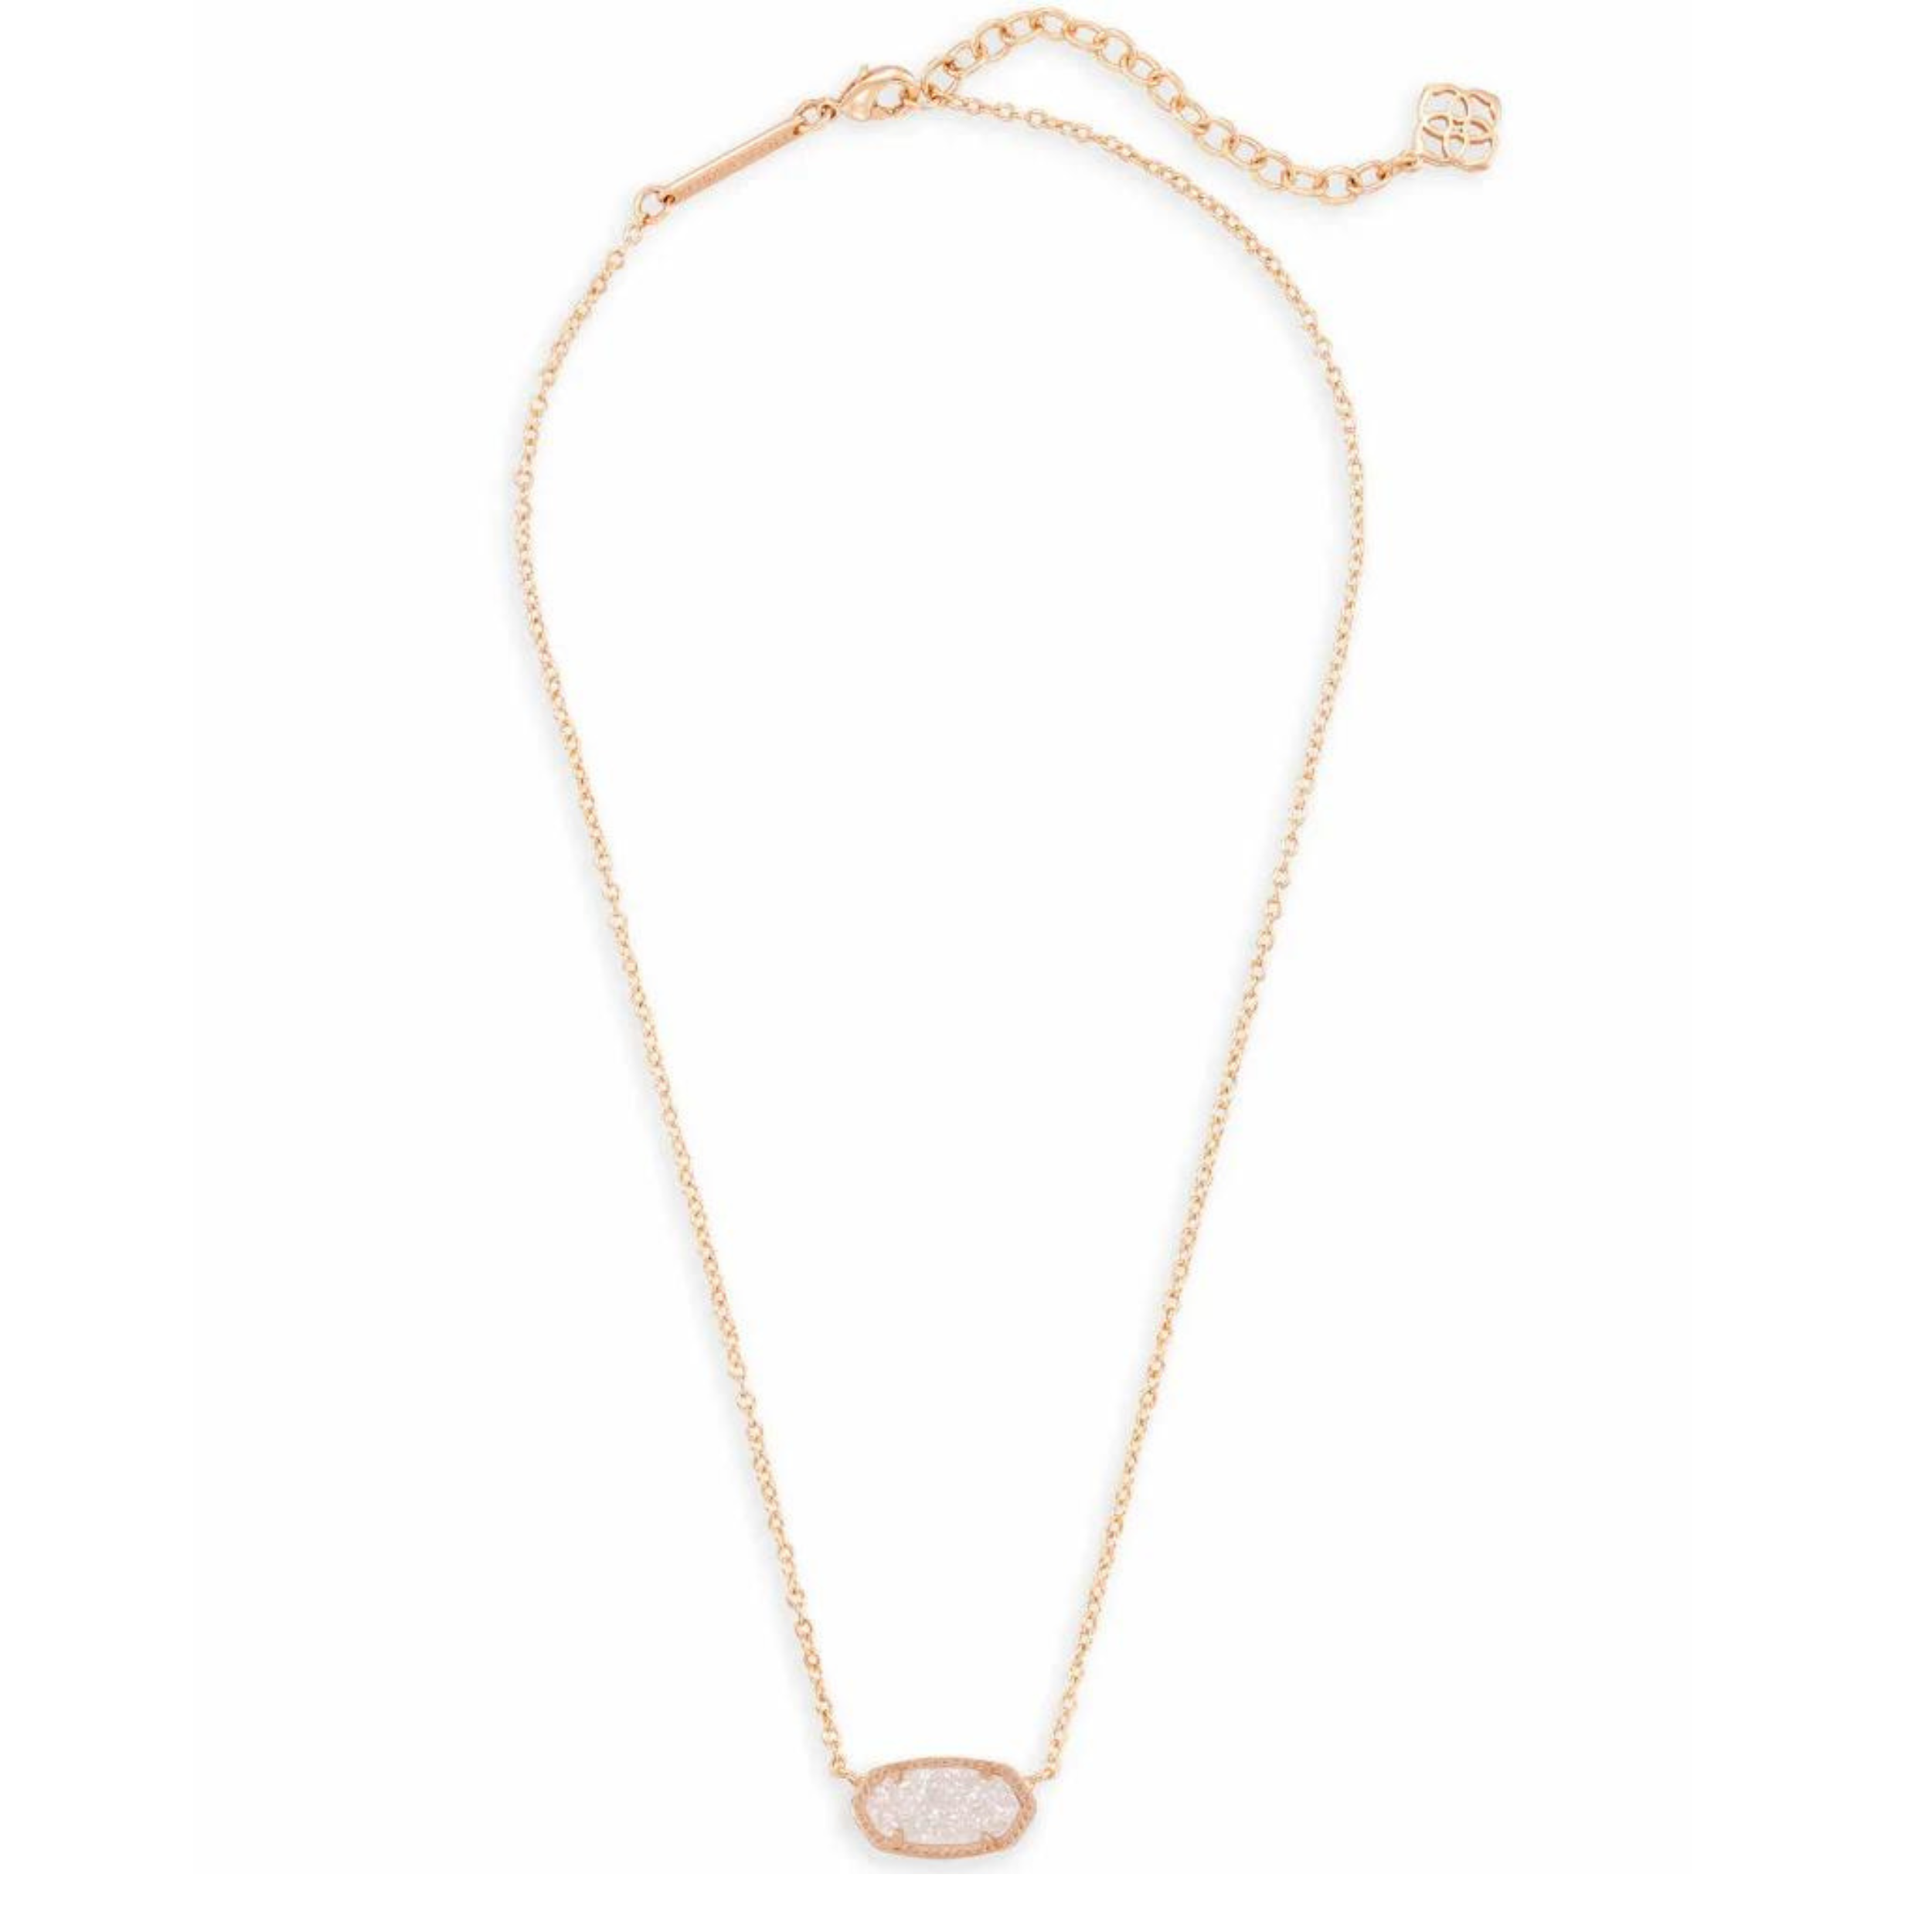 Kendra Scott | Elisa Rose Gold Pendant Necklace in Iridescent Drusy - Giddy Up Glamour Boutique